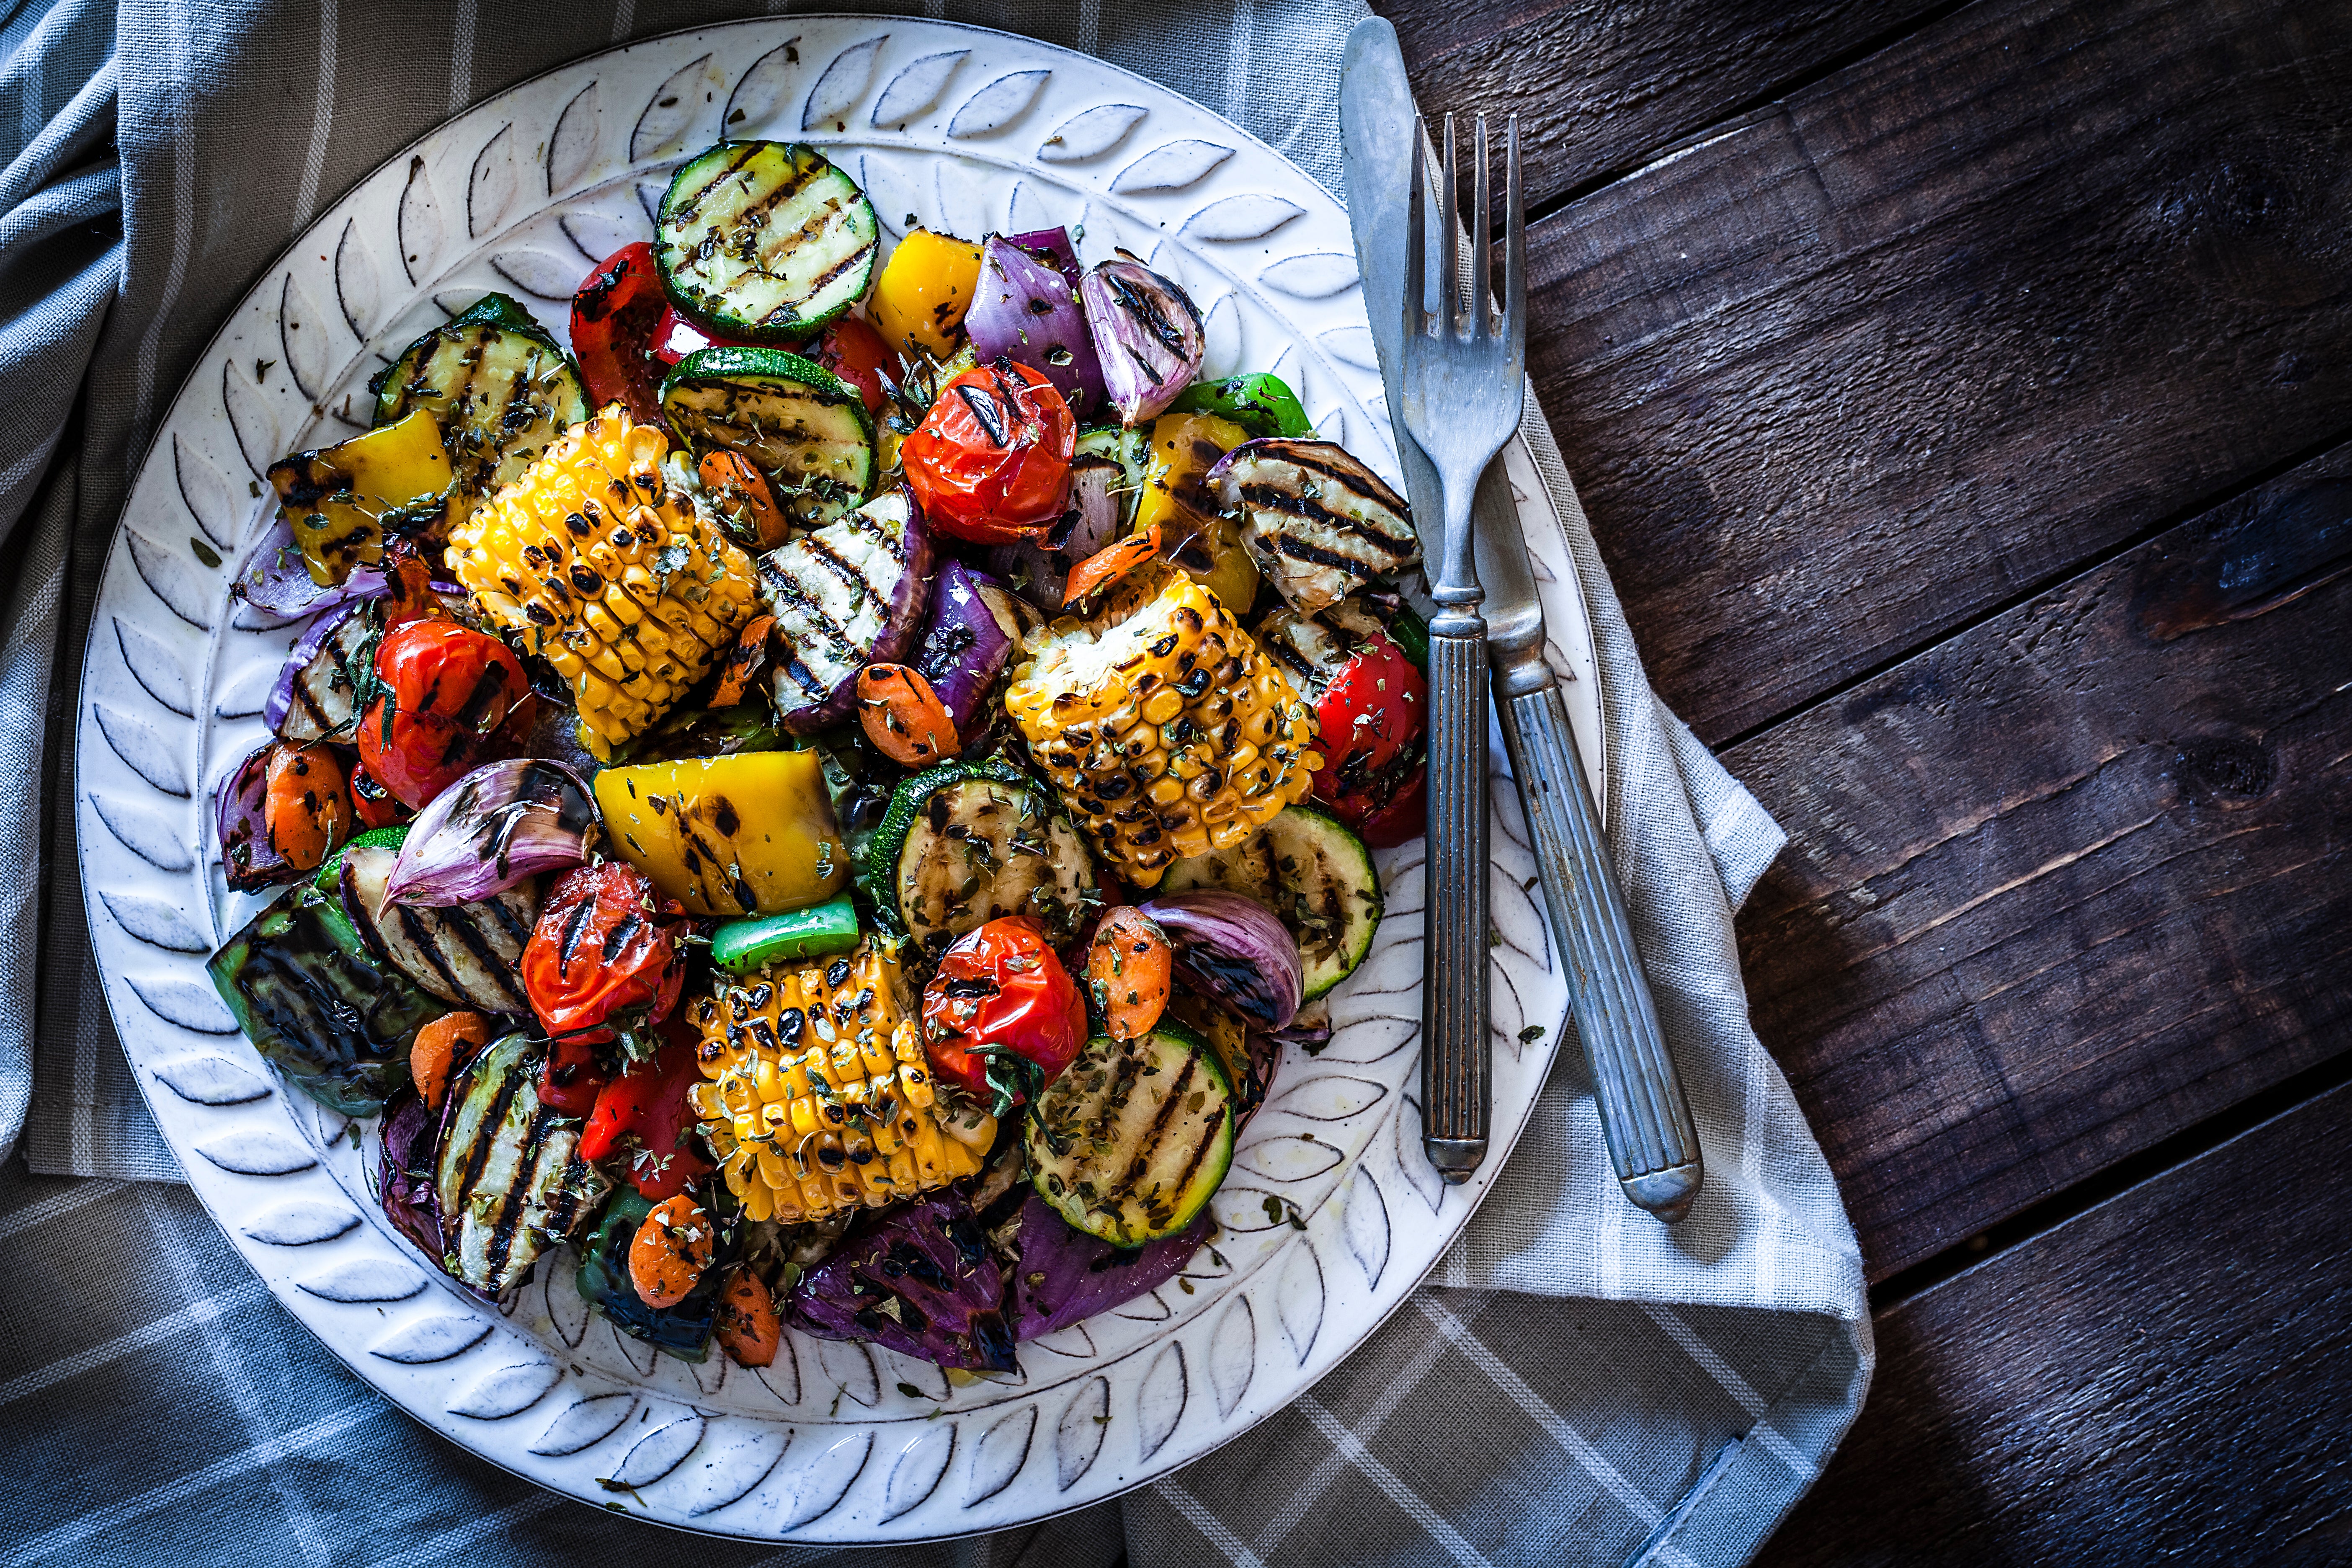 These flavourful roasted vegetables will blow you away